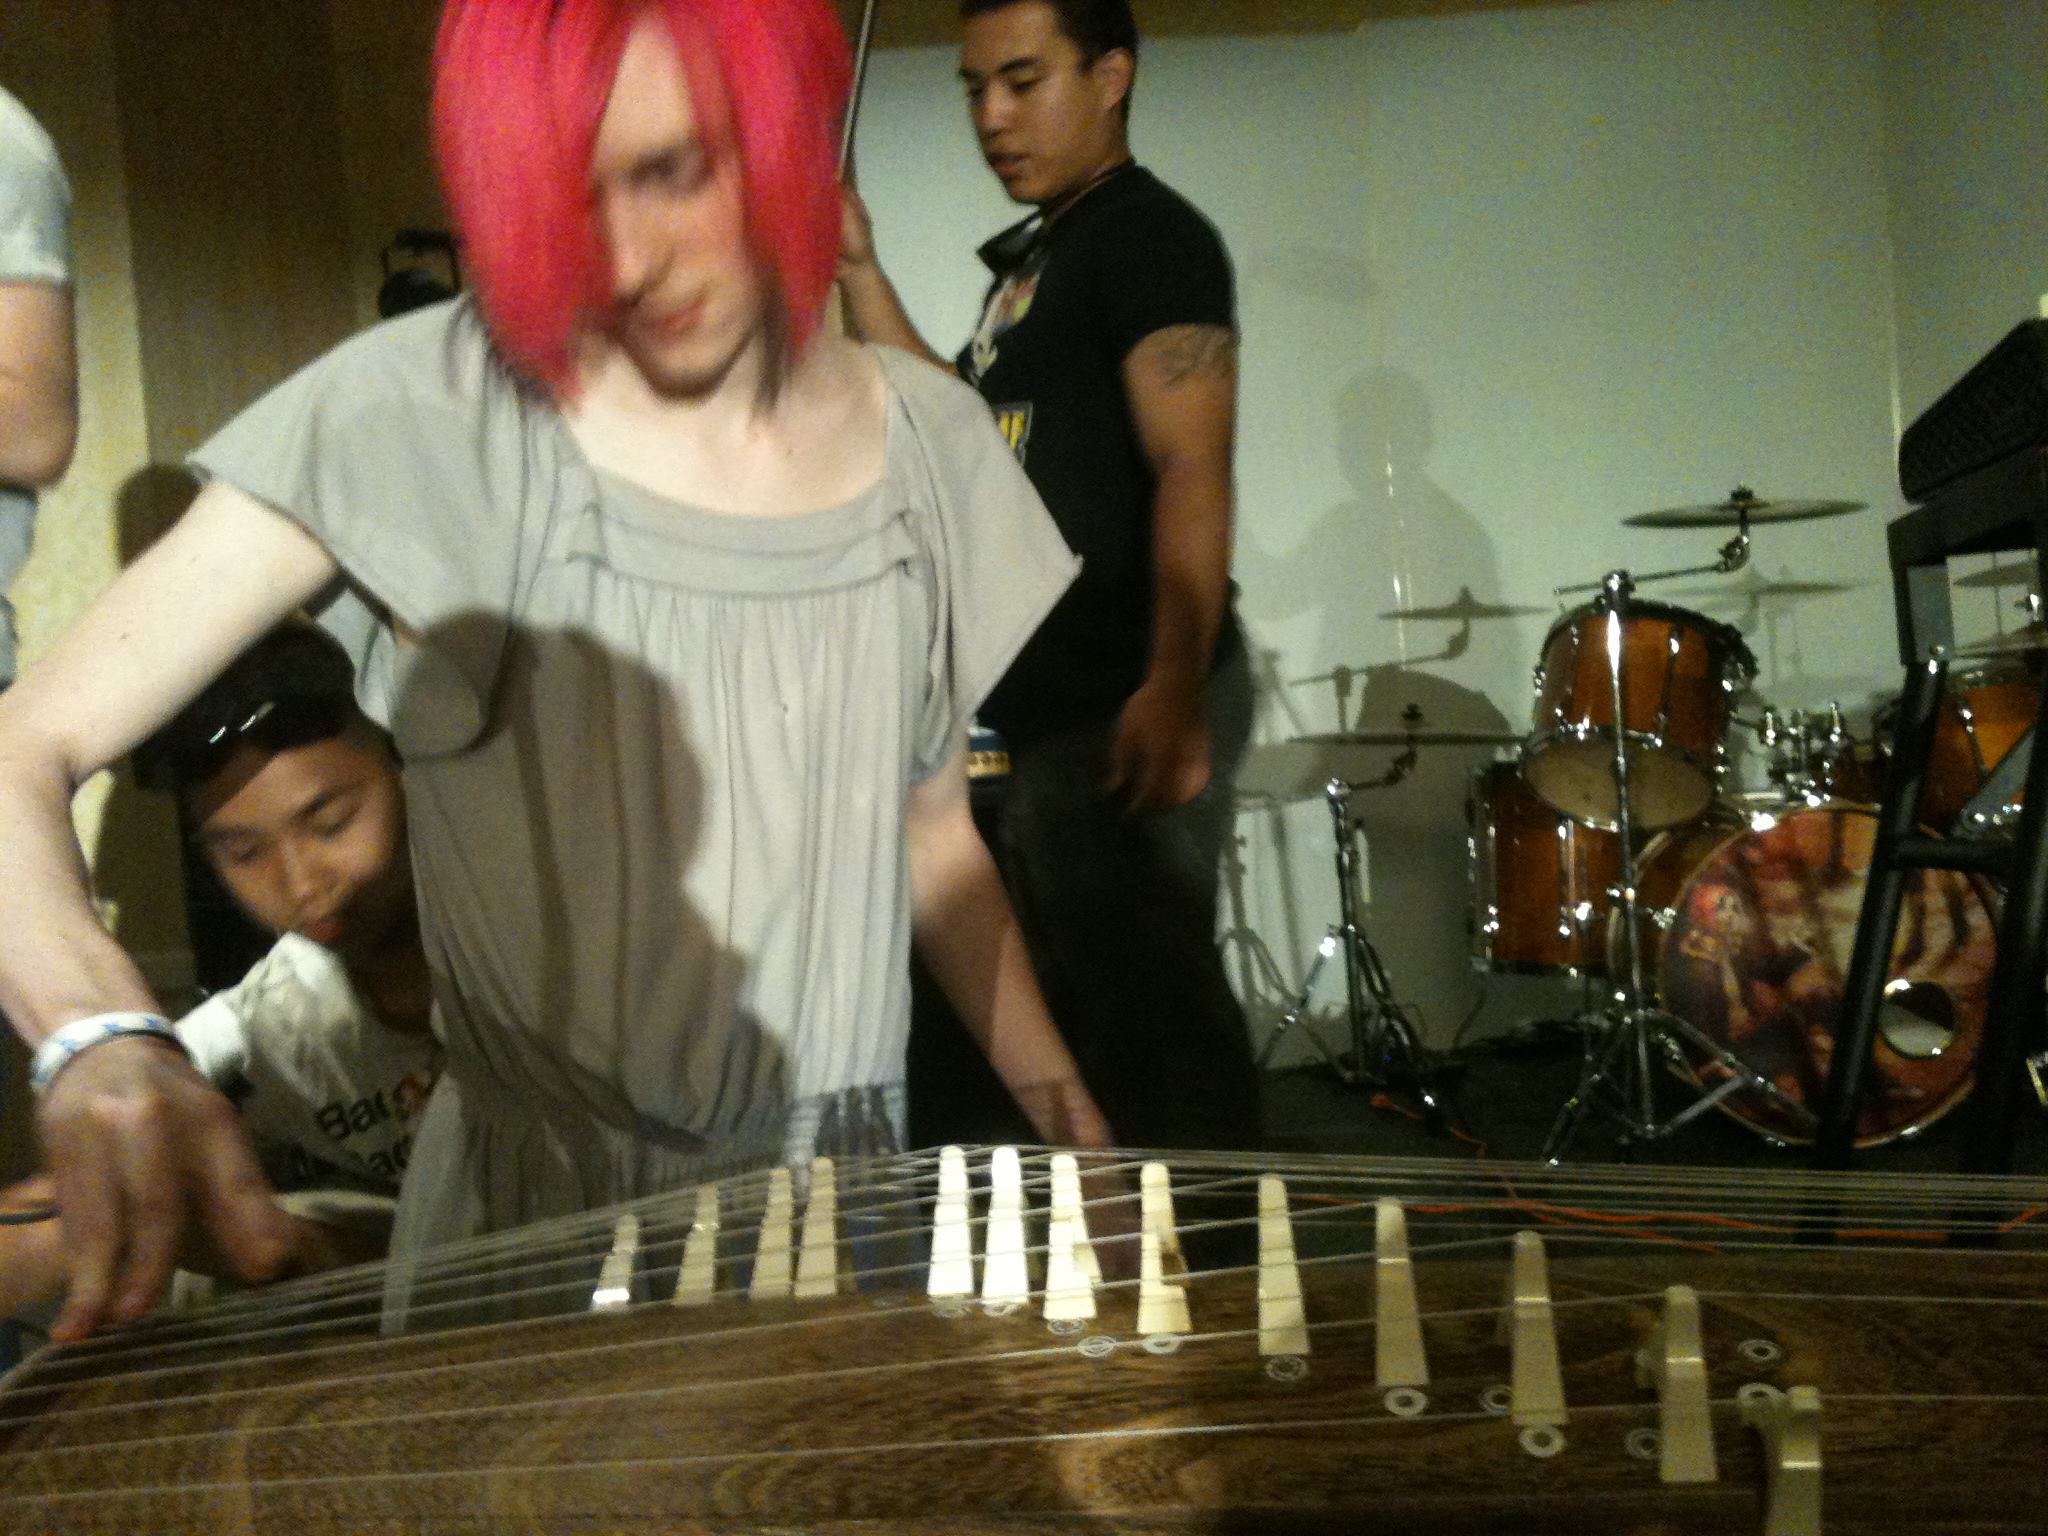 Robbi playing koto during soundcheck while Mike and Suan get ready to film the performance. Photo by Amanda Manzanares